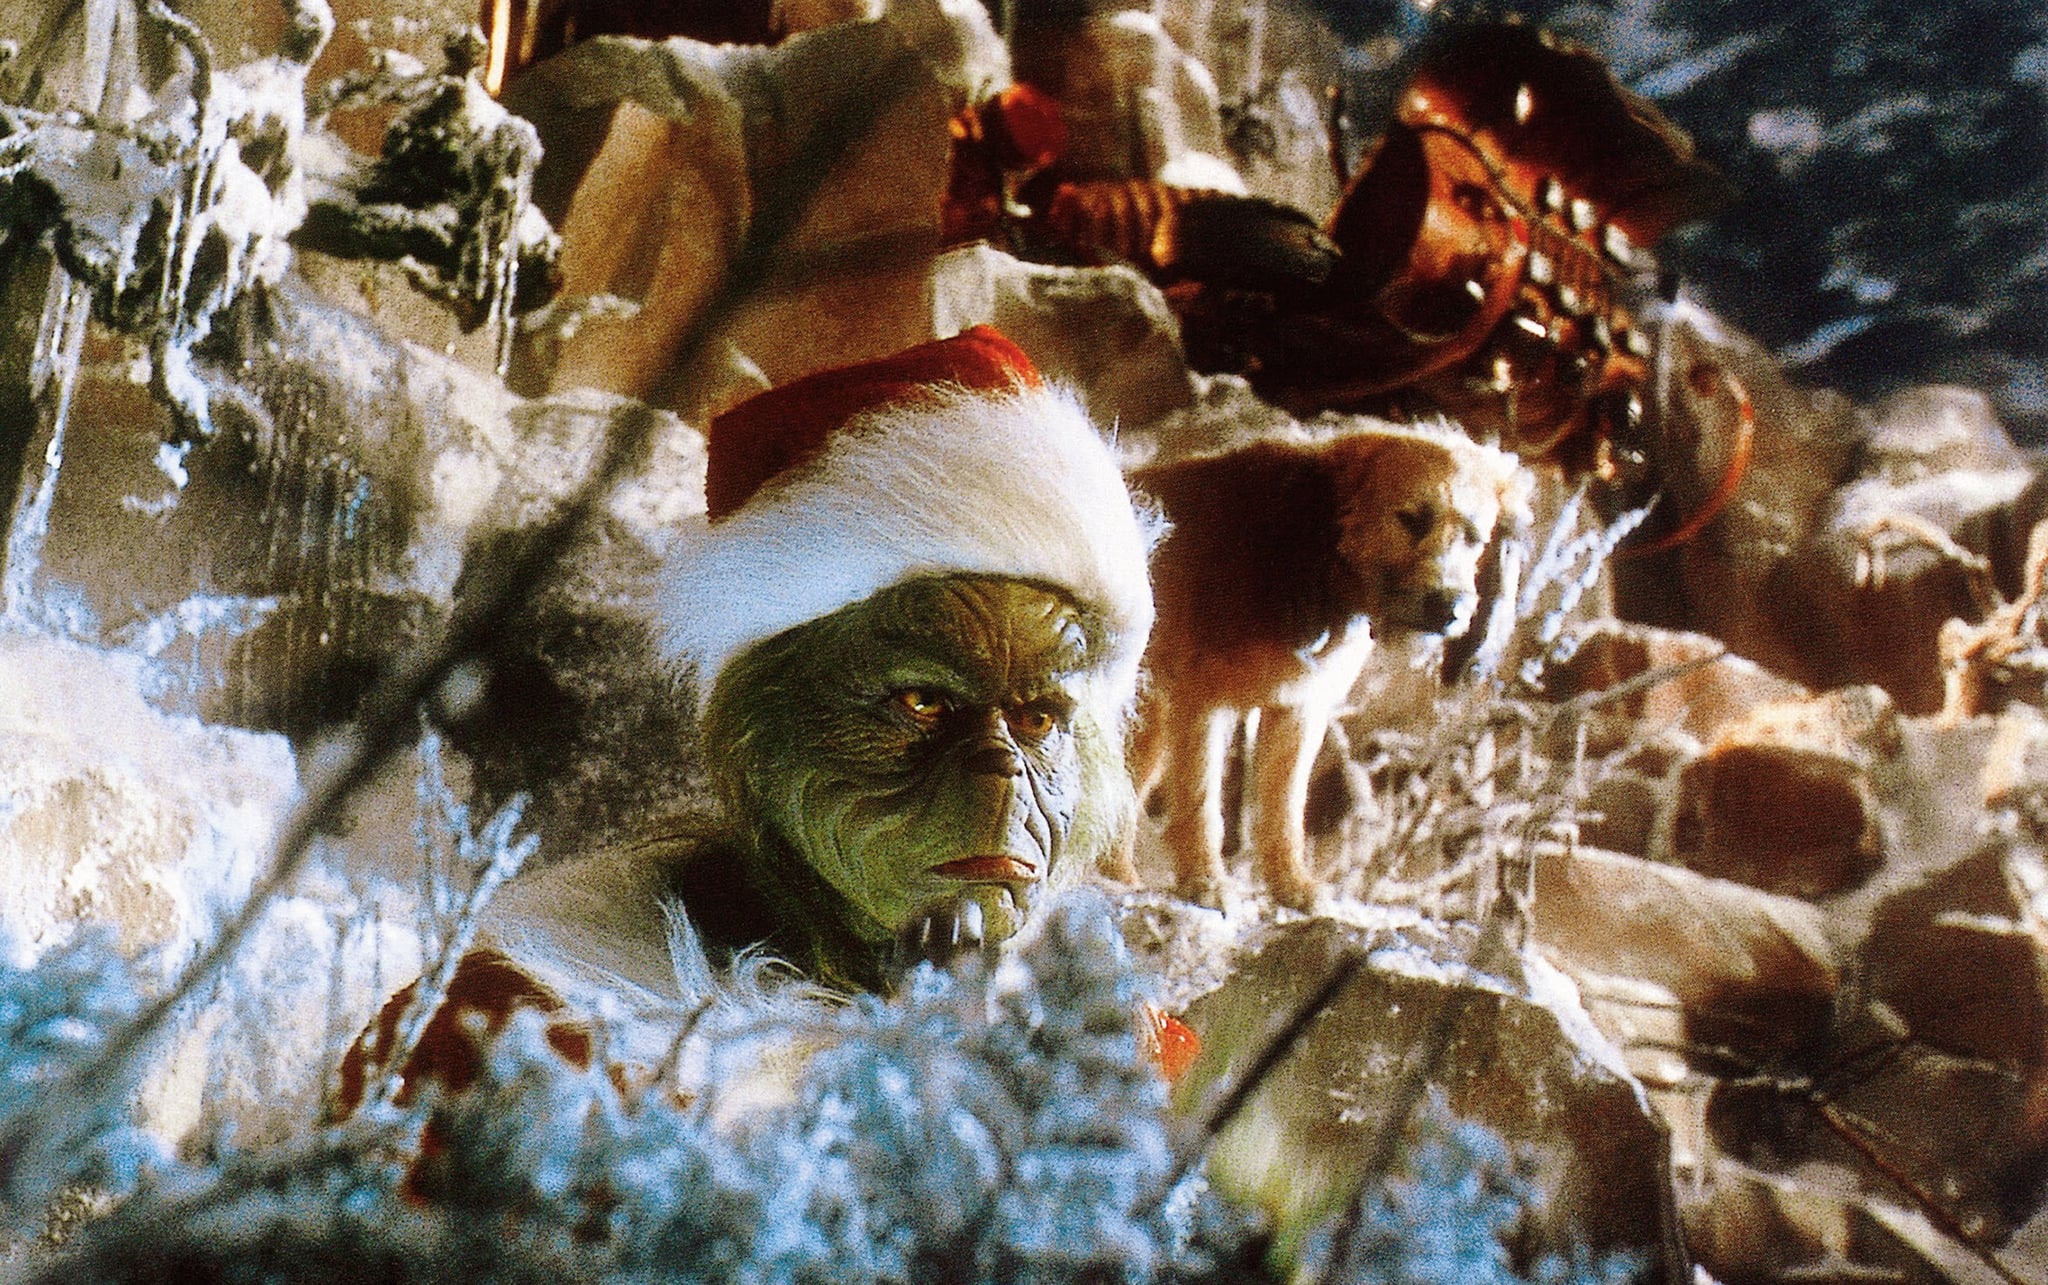 DOCTOR SEUSS' HOW THE GRINCH STOLE CHRISTMAS, Jim Carrey, 2000,  Universal/courtesy Everett Collection